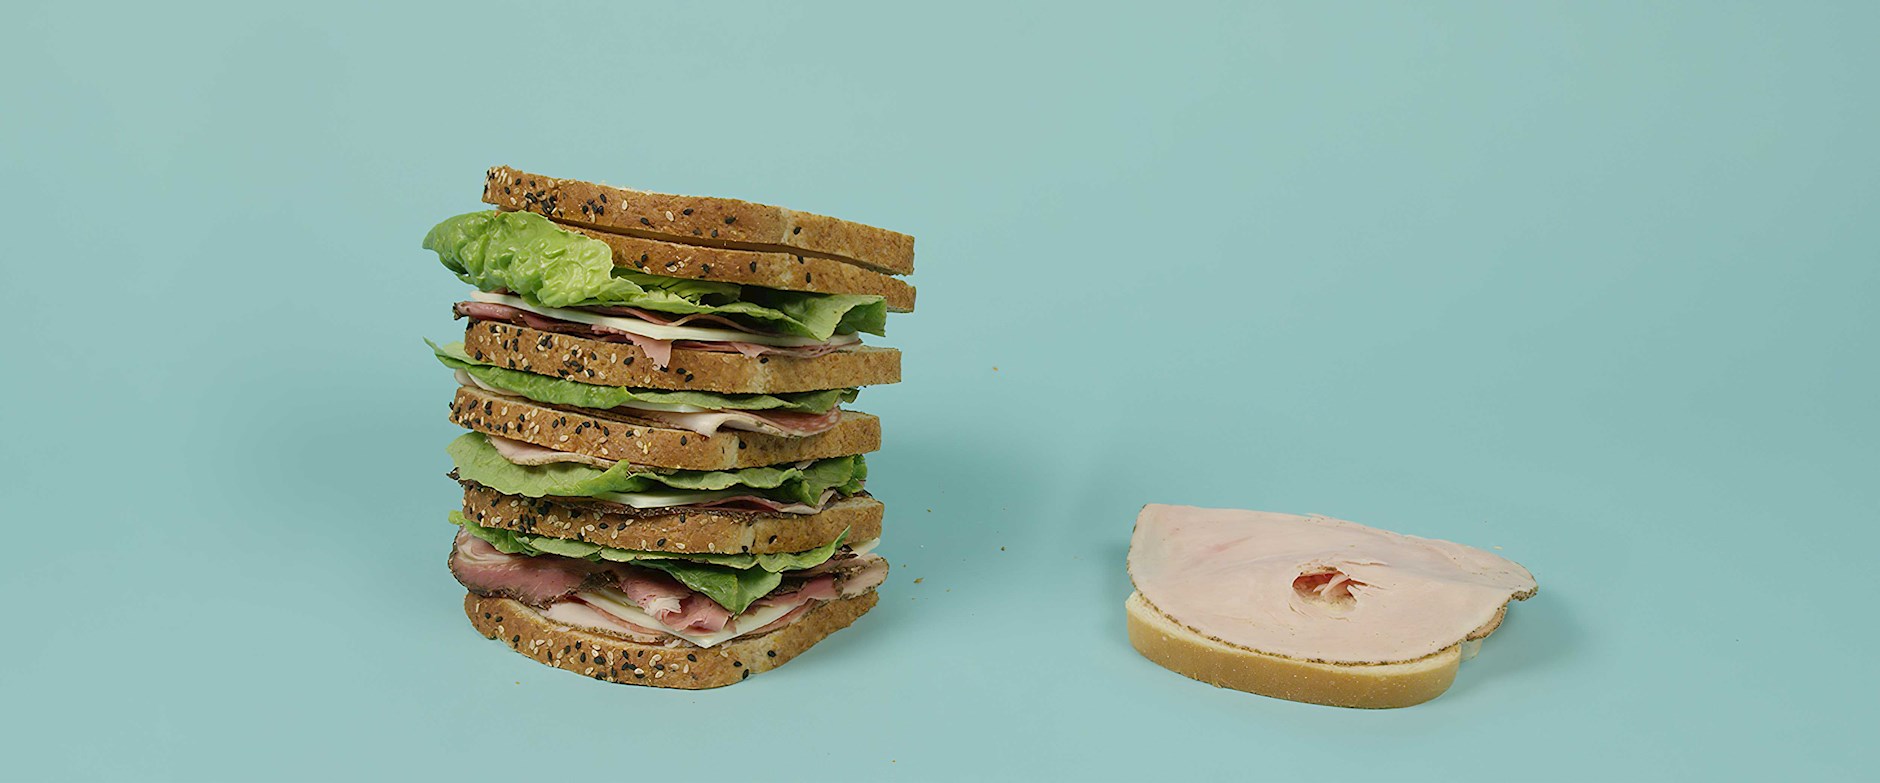 Two sandwiches, one large, one small